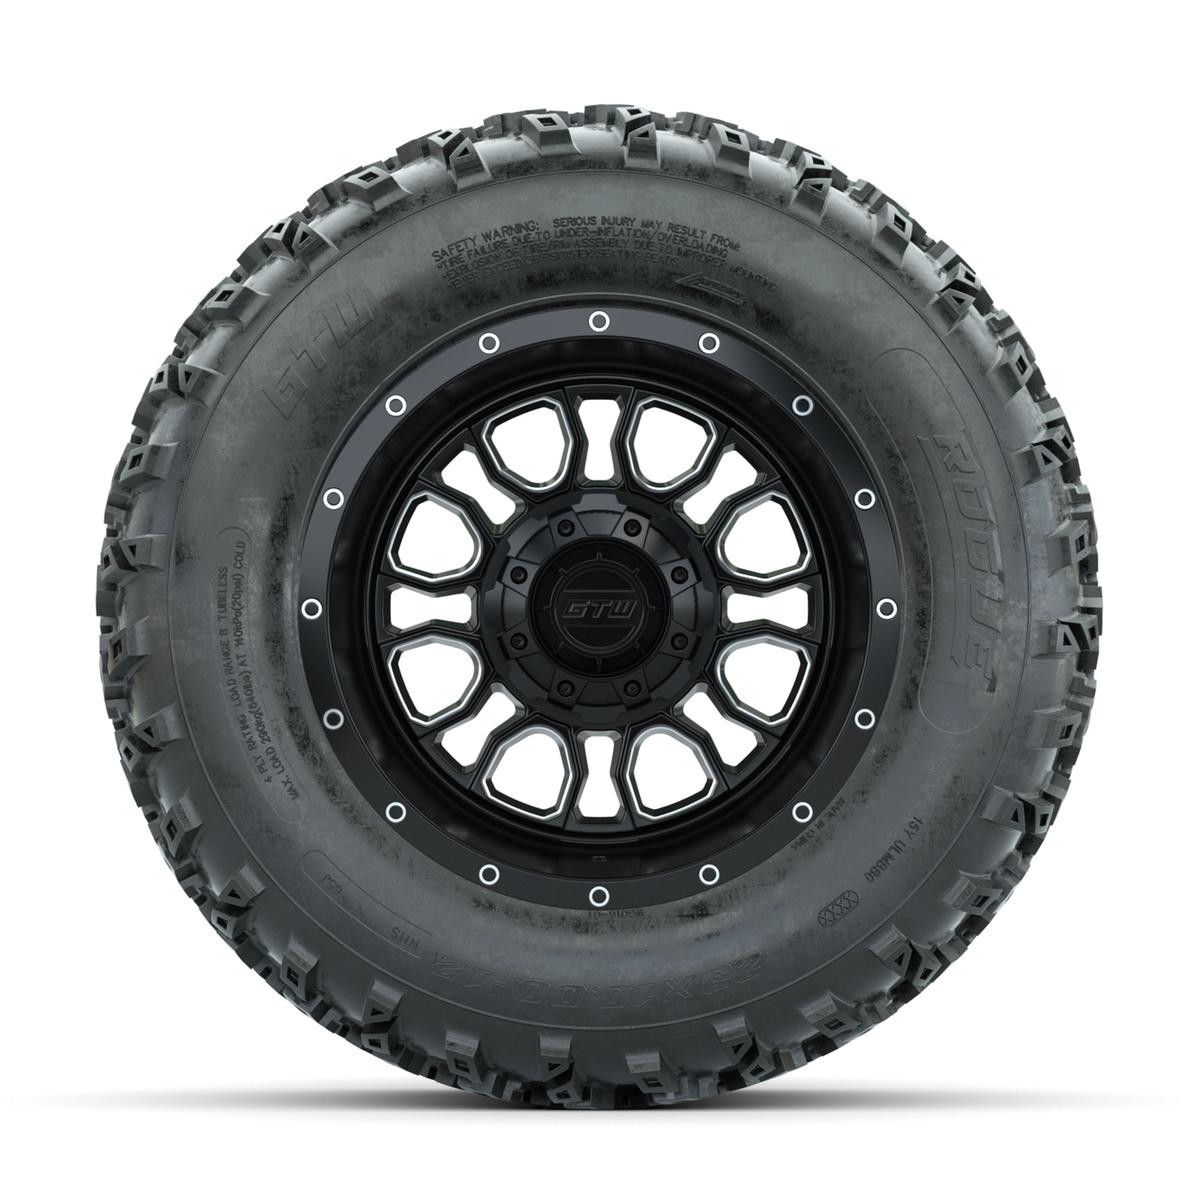 GTW Volt Machined/Black 12 in Wheels with 23x10.00-12 Rogue All Terrain Tires – Full Set